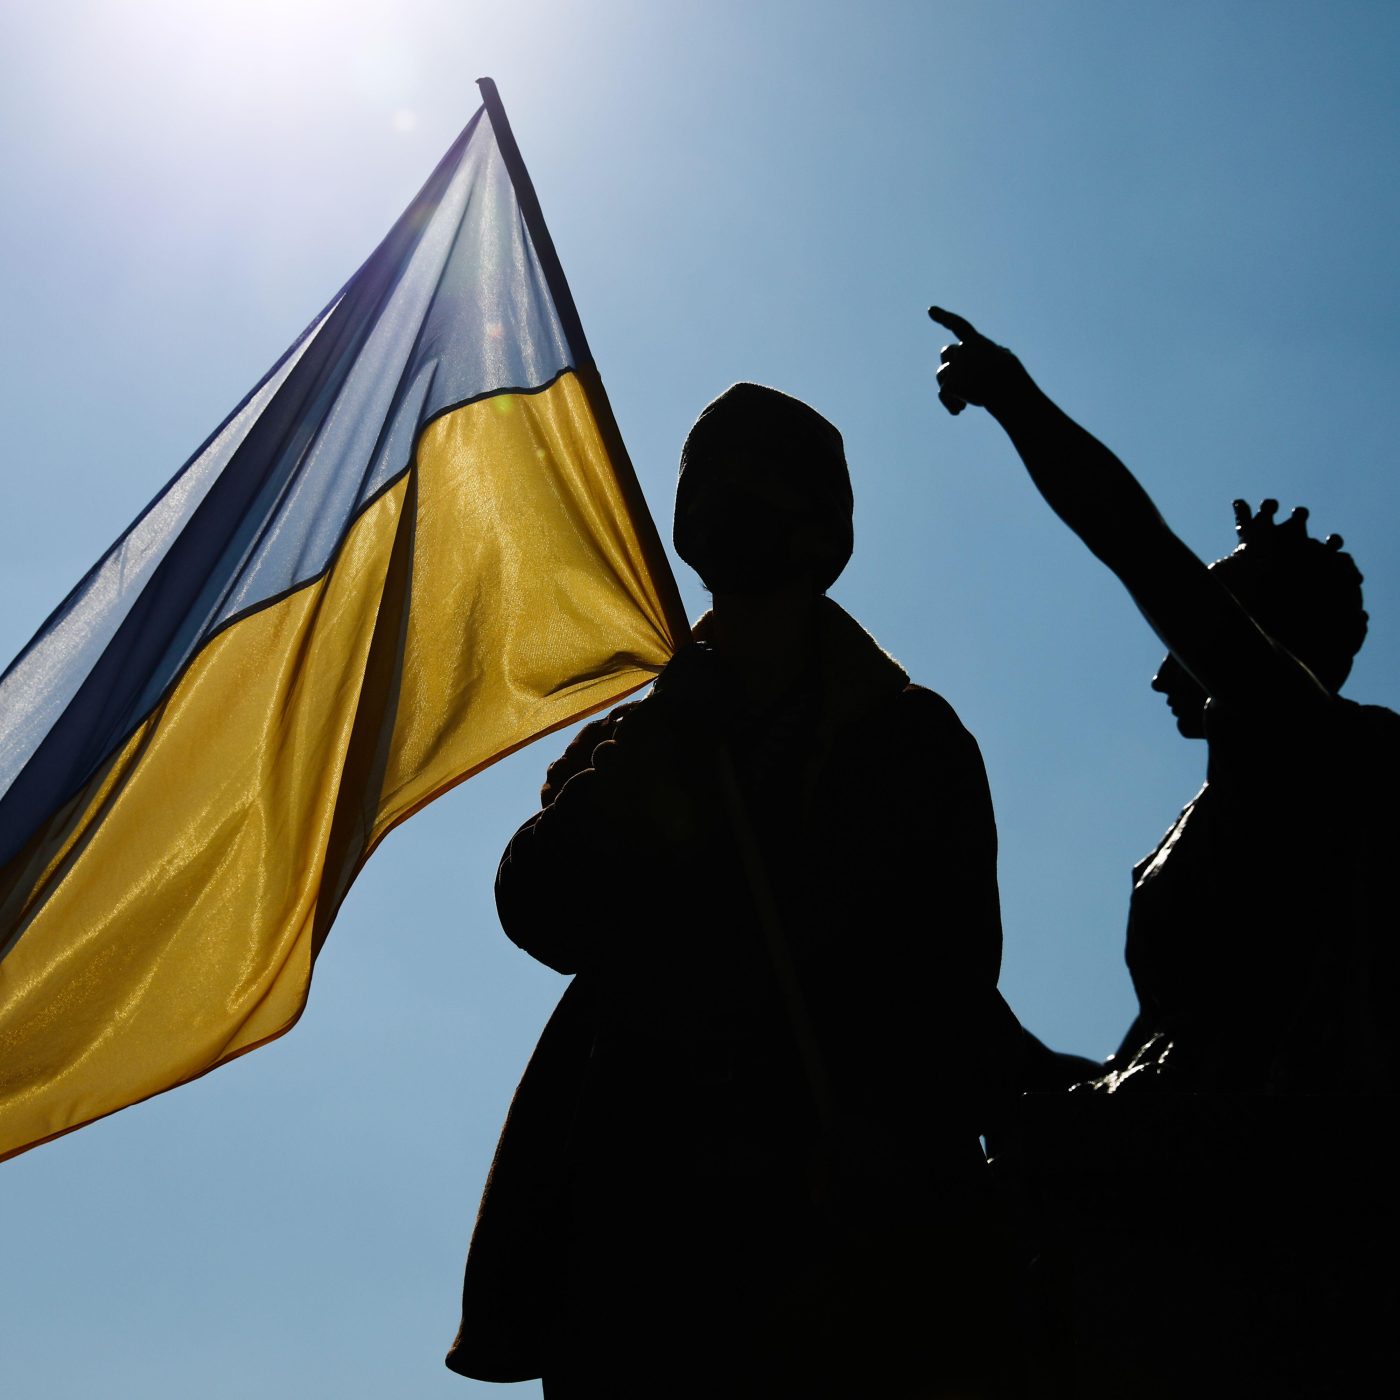 Photo: A protester holds an Ukrainian flag as he stand on the monument during demonstration in Krakow, Poland on March 17, 2022. Credit: Jakub Porzycki/NurPhoto